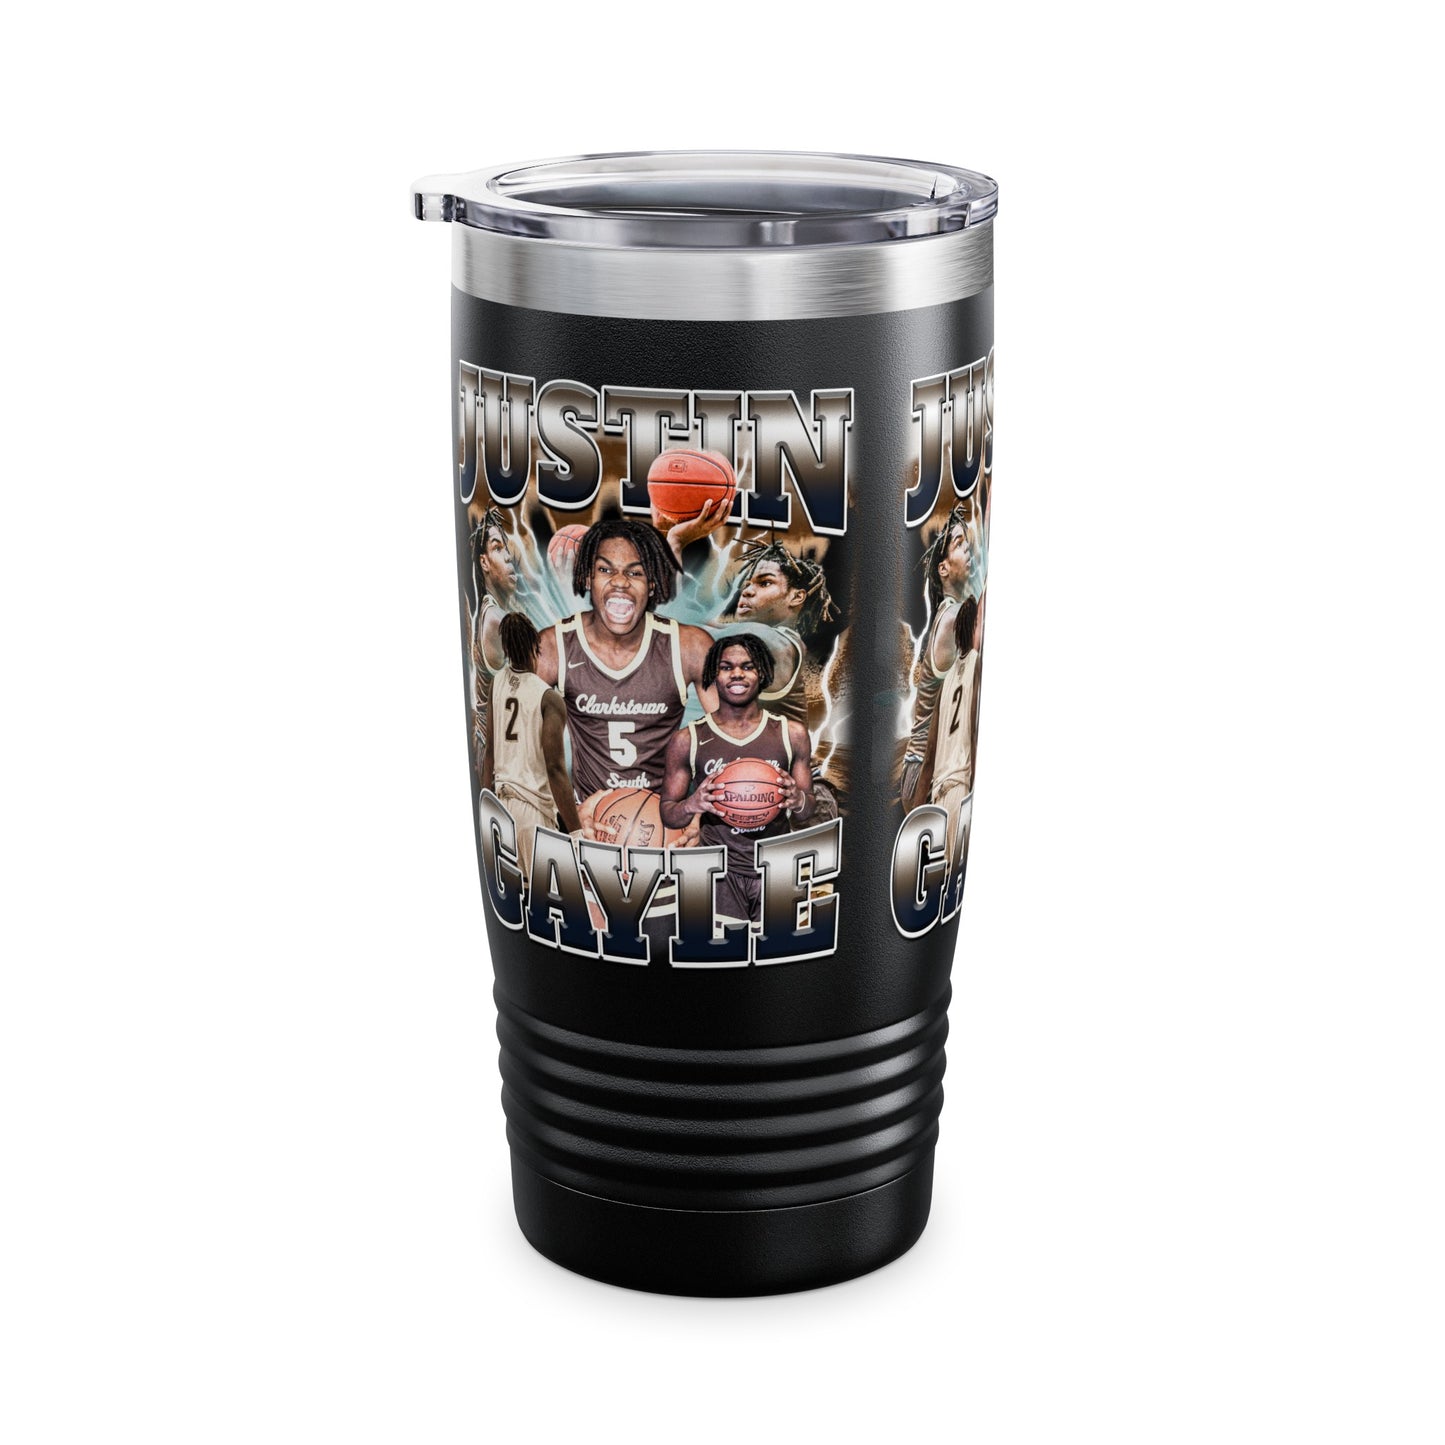 Justin Gayle Stainless Steal Tumbler